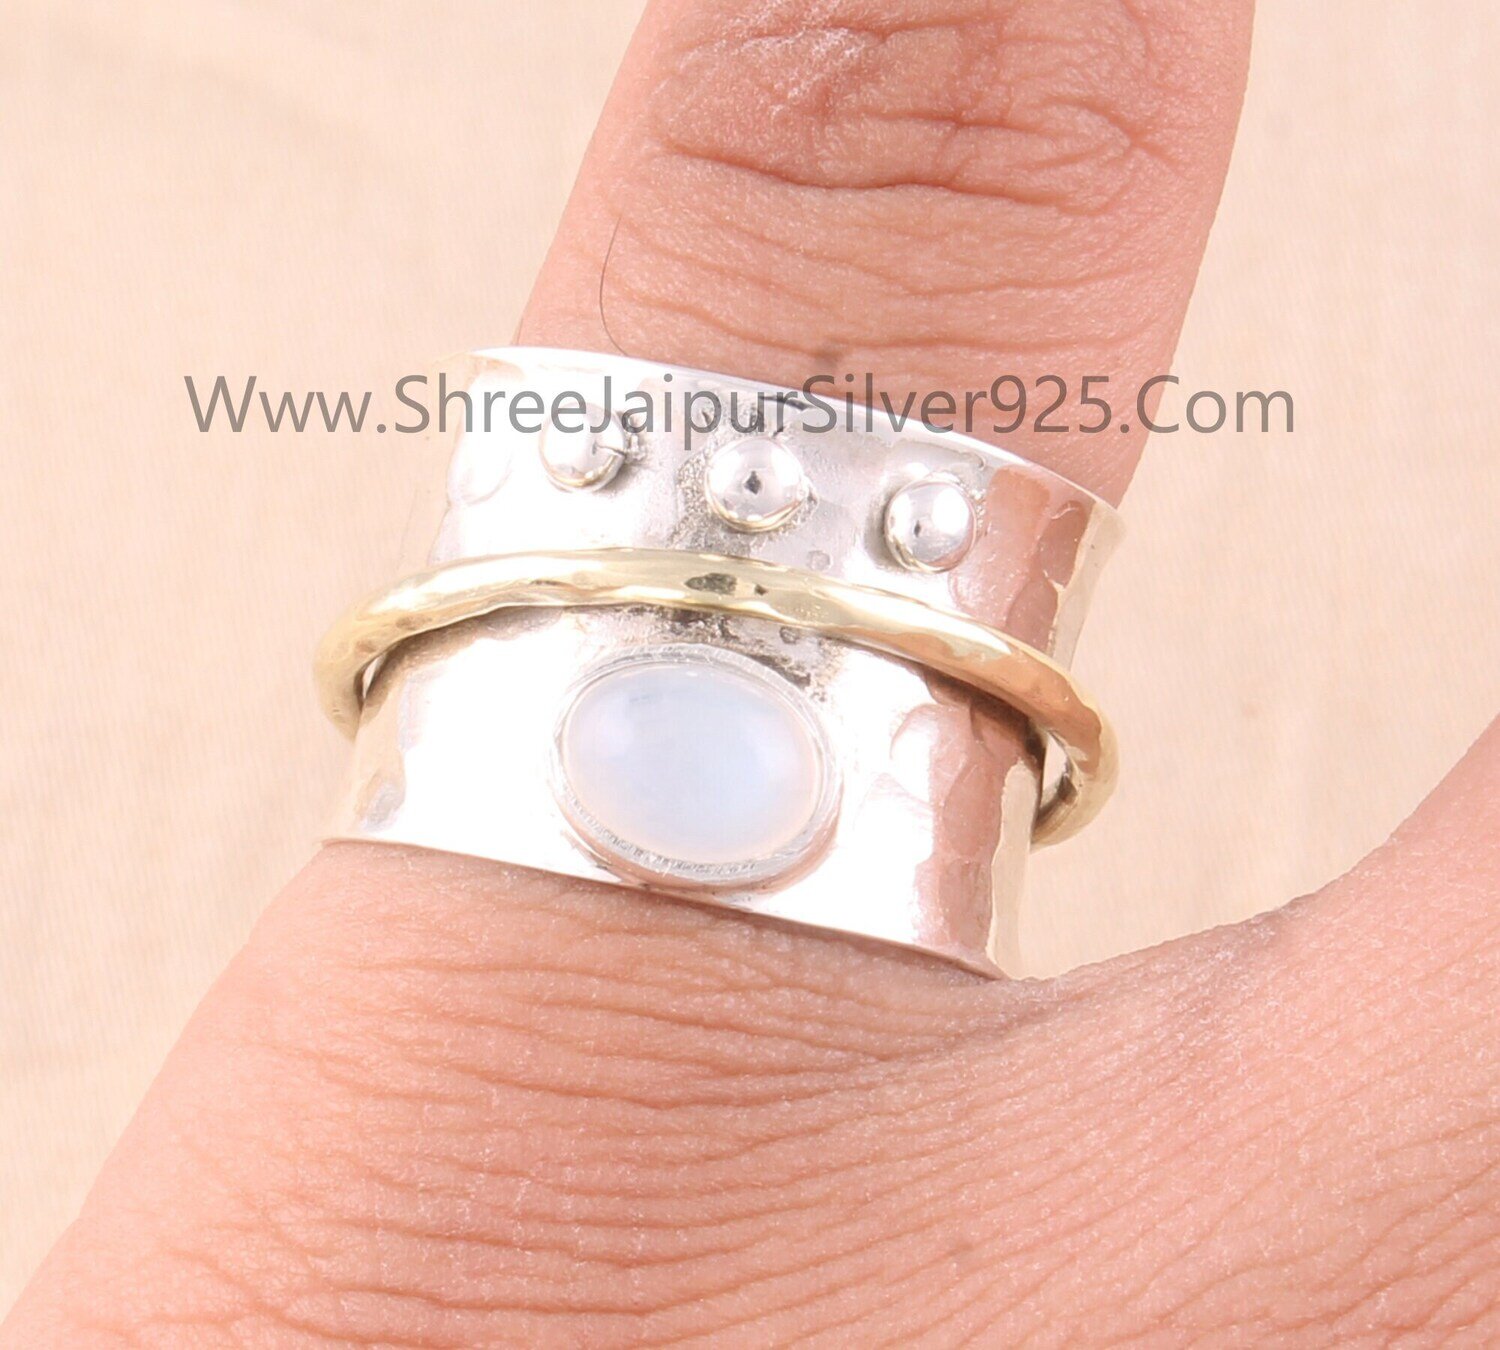 Rainbow Moonstone Solid 925 Sterling Silver Spinner Ring For Women, Handmade Oval Meditation Wedding Ring Boho Worry Anxiety Ring Gift Idea